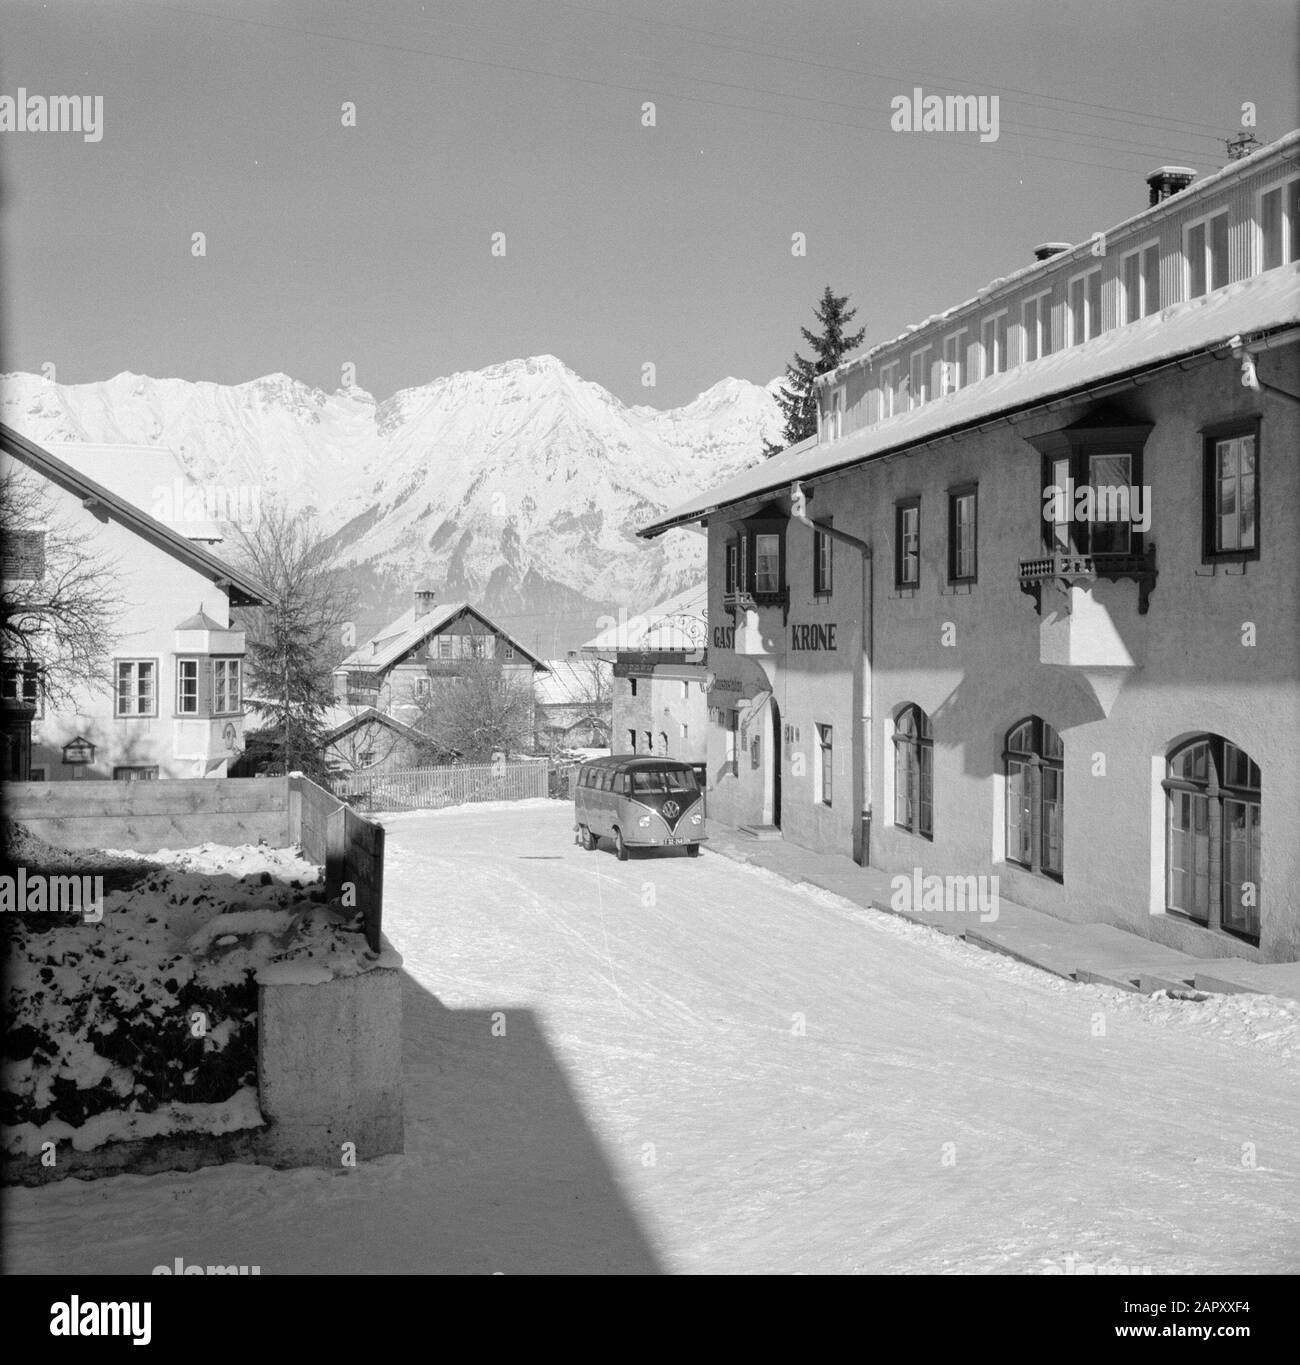 Winter in Tyrol  Volkswagen bus for Gasthaus Krone in Sistrans with in the background the Karwendel Mountains Date: January 1960 Location: Austria, Sistrans, Tyrol Keywords: cars, mountains, villages, hotels, snow, winter Stock Photo